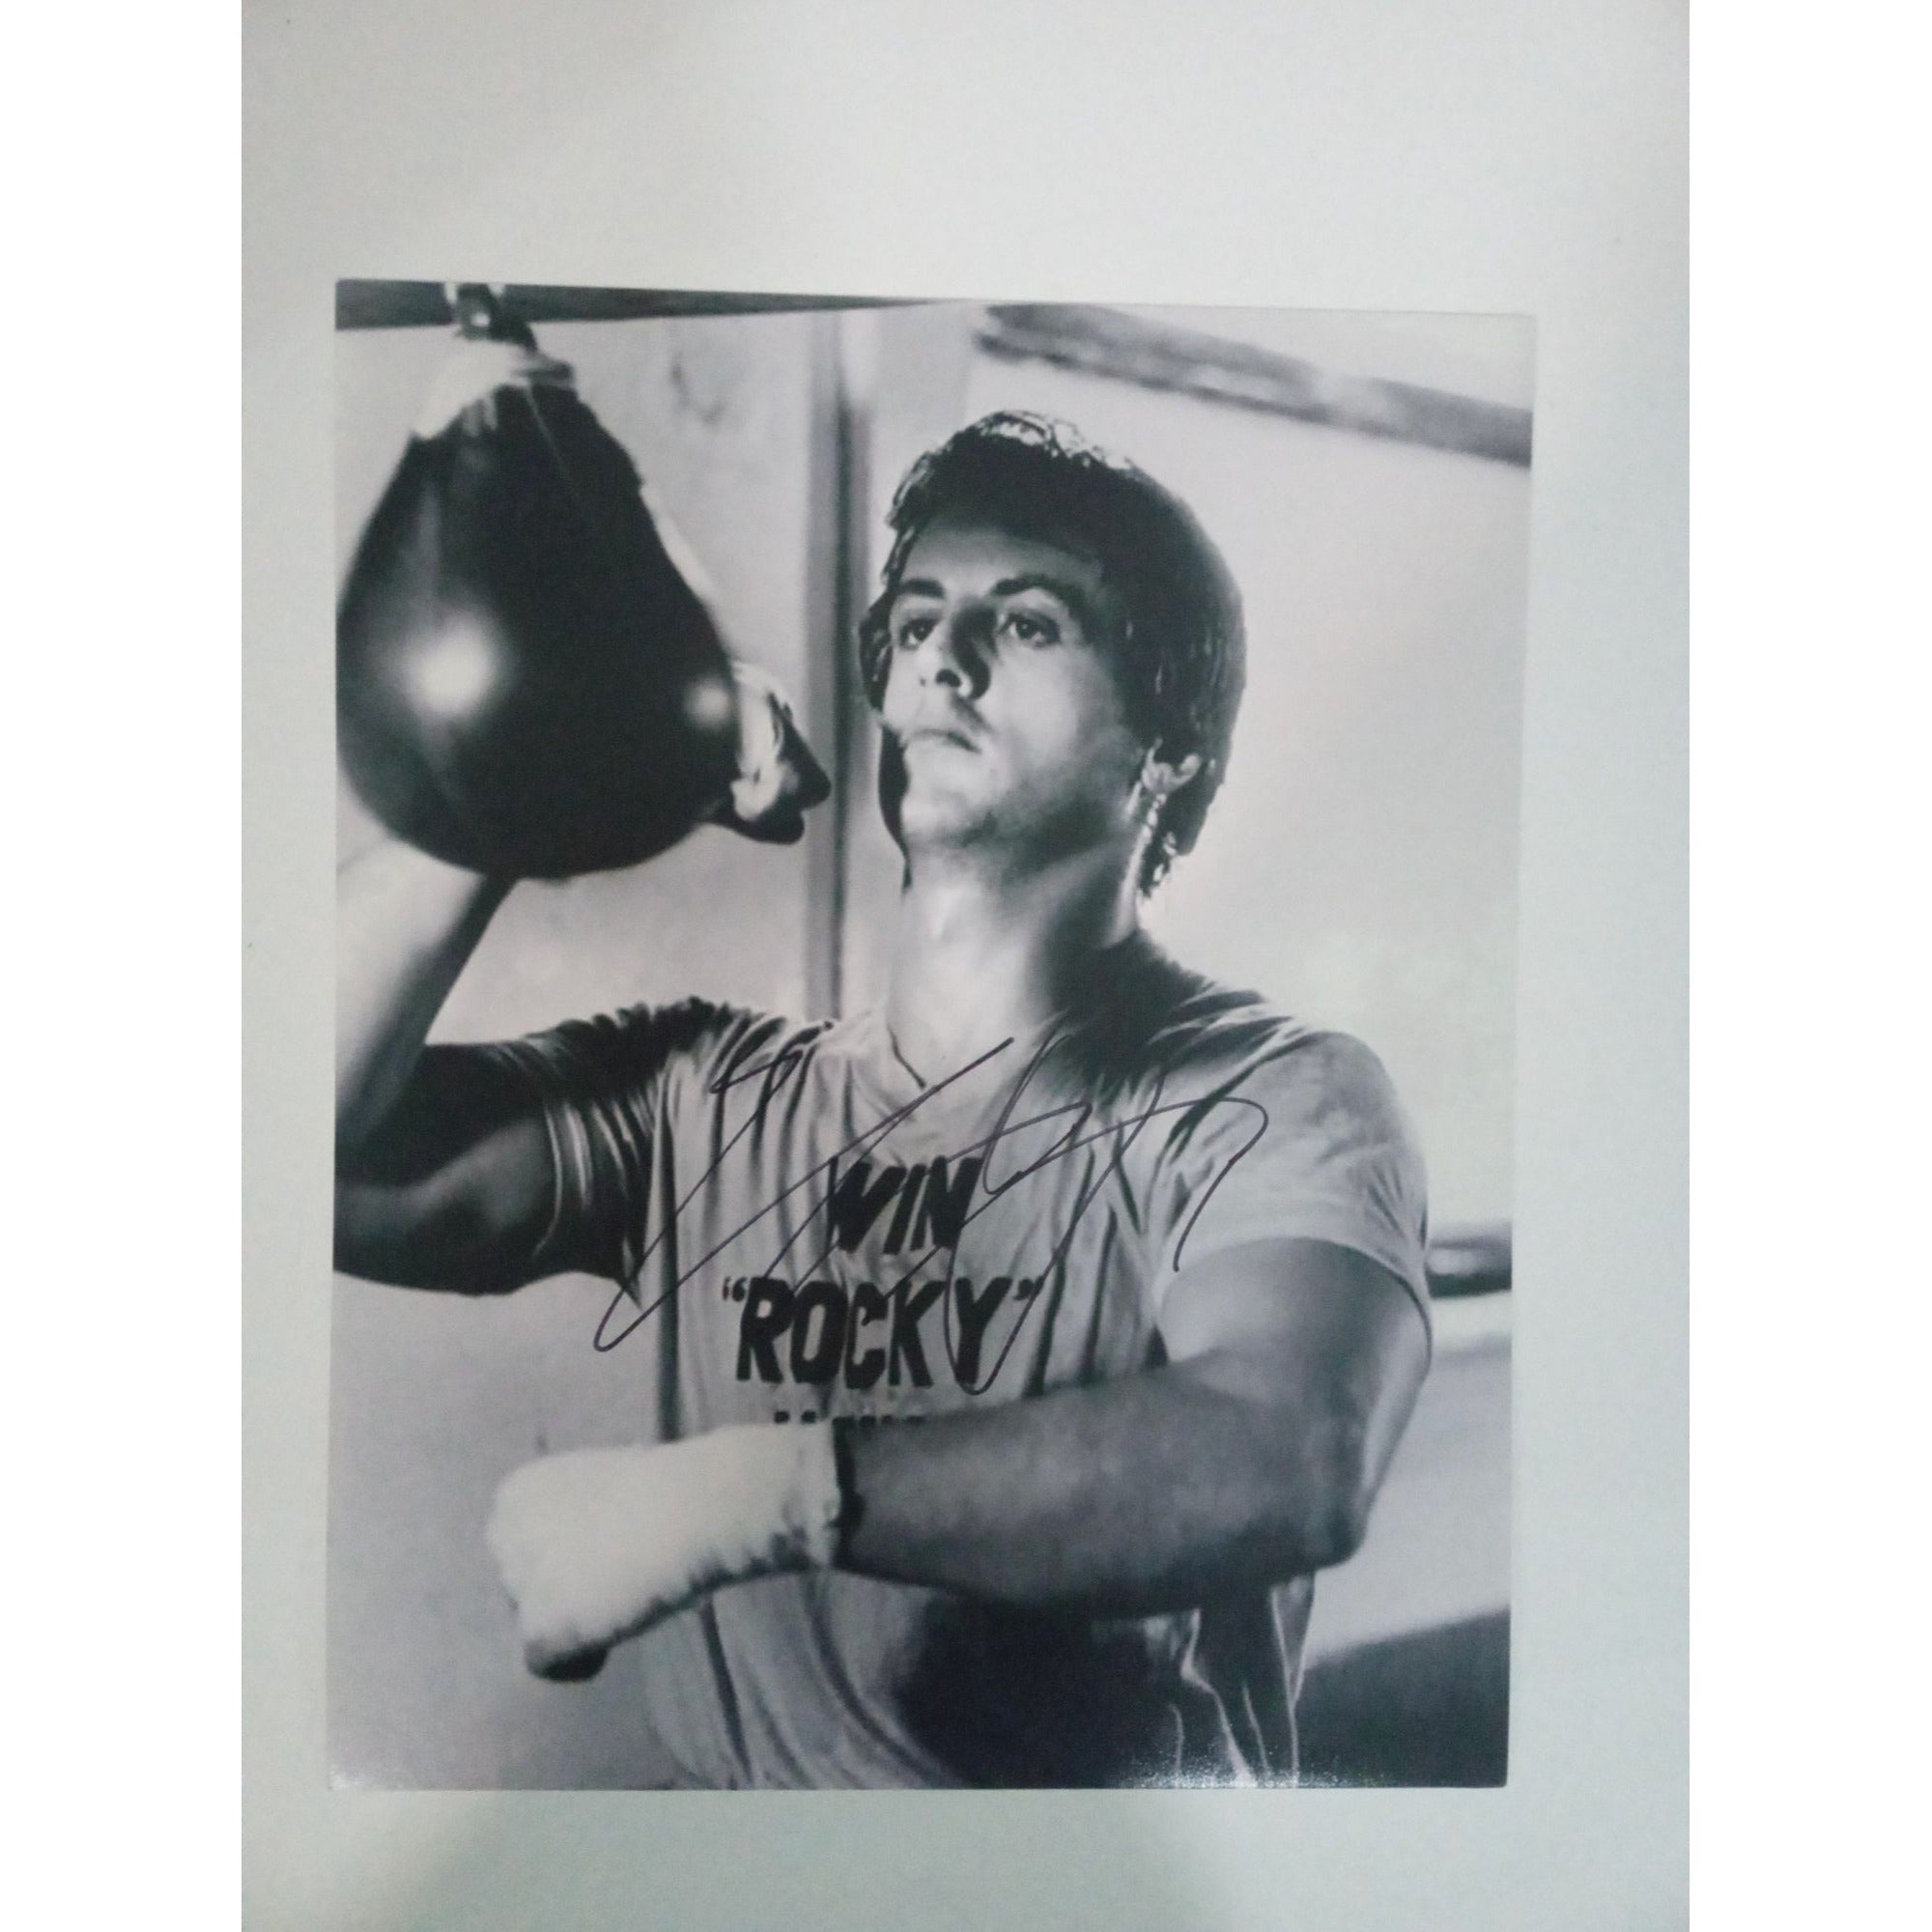 Sylvester Stallone Rocky Balboa signed 8x10 photo with proof